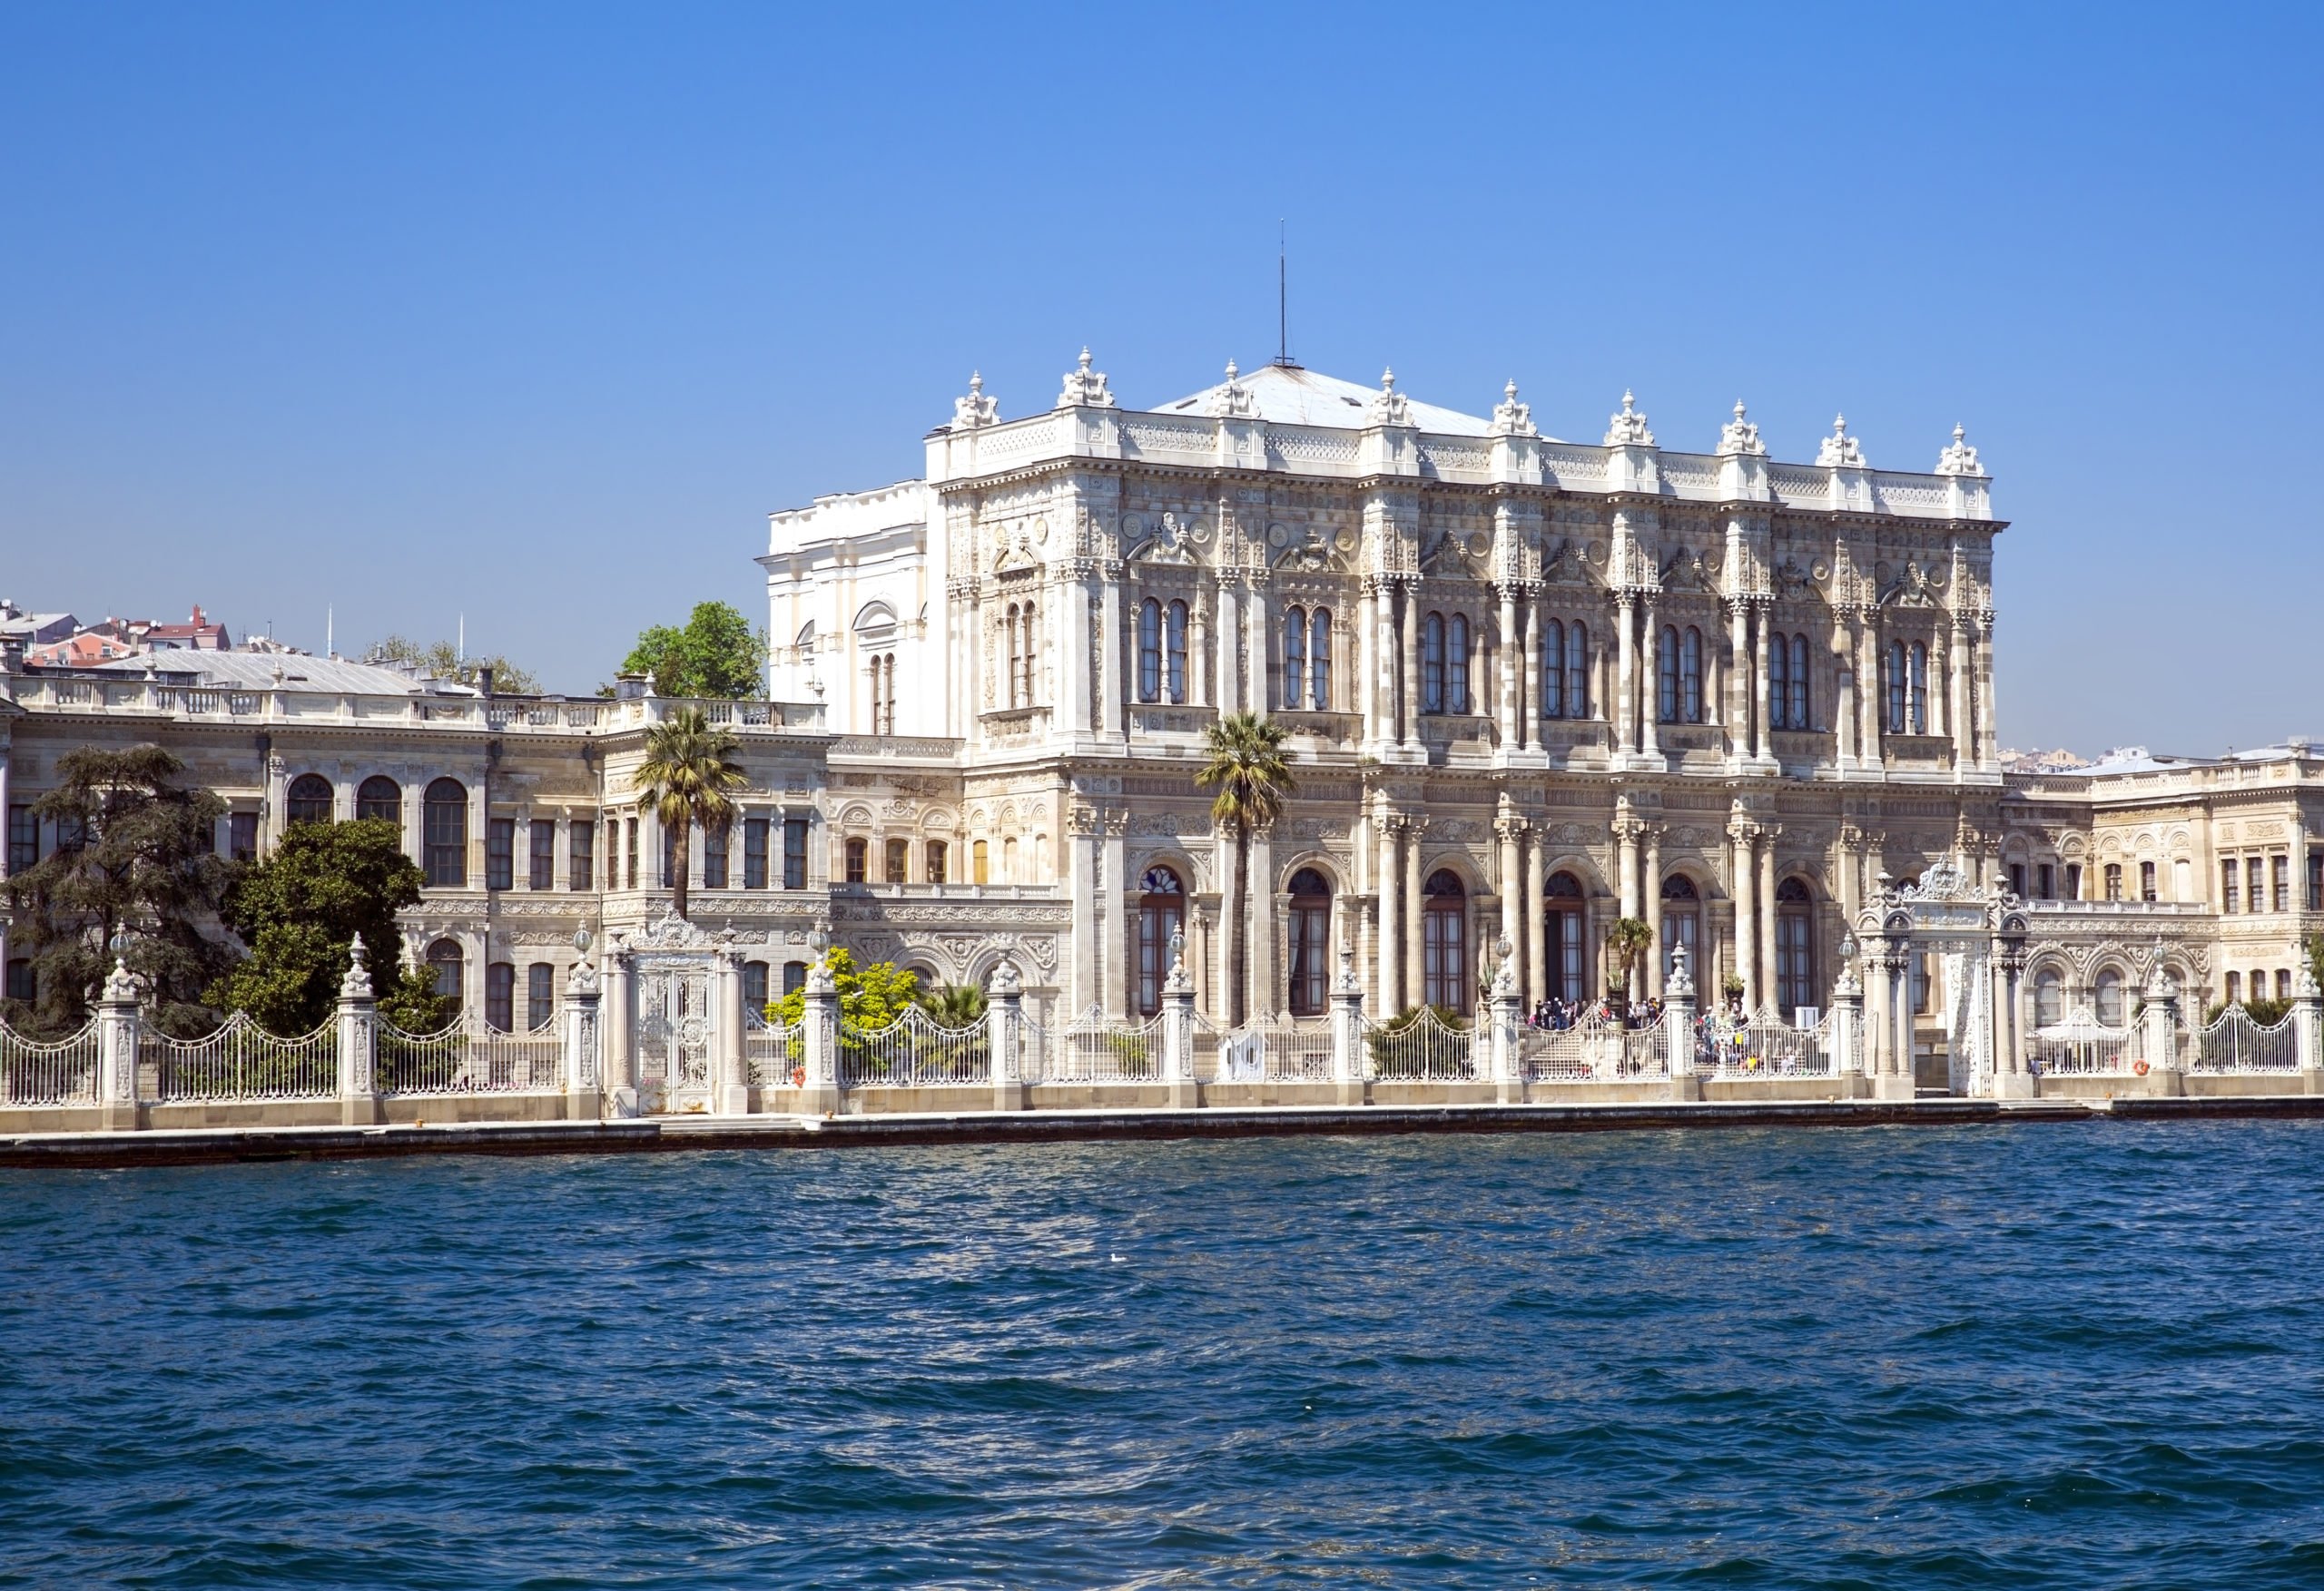 Enjoy A Guided Tour Of The Dolmabahce Palace On The Dolmabahce Palace Tour & Bosporus Cruise From Istanbul